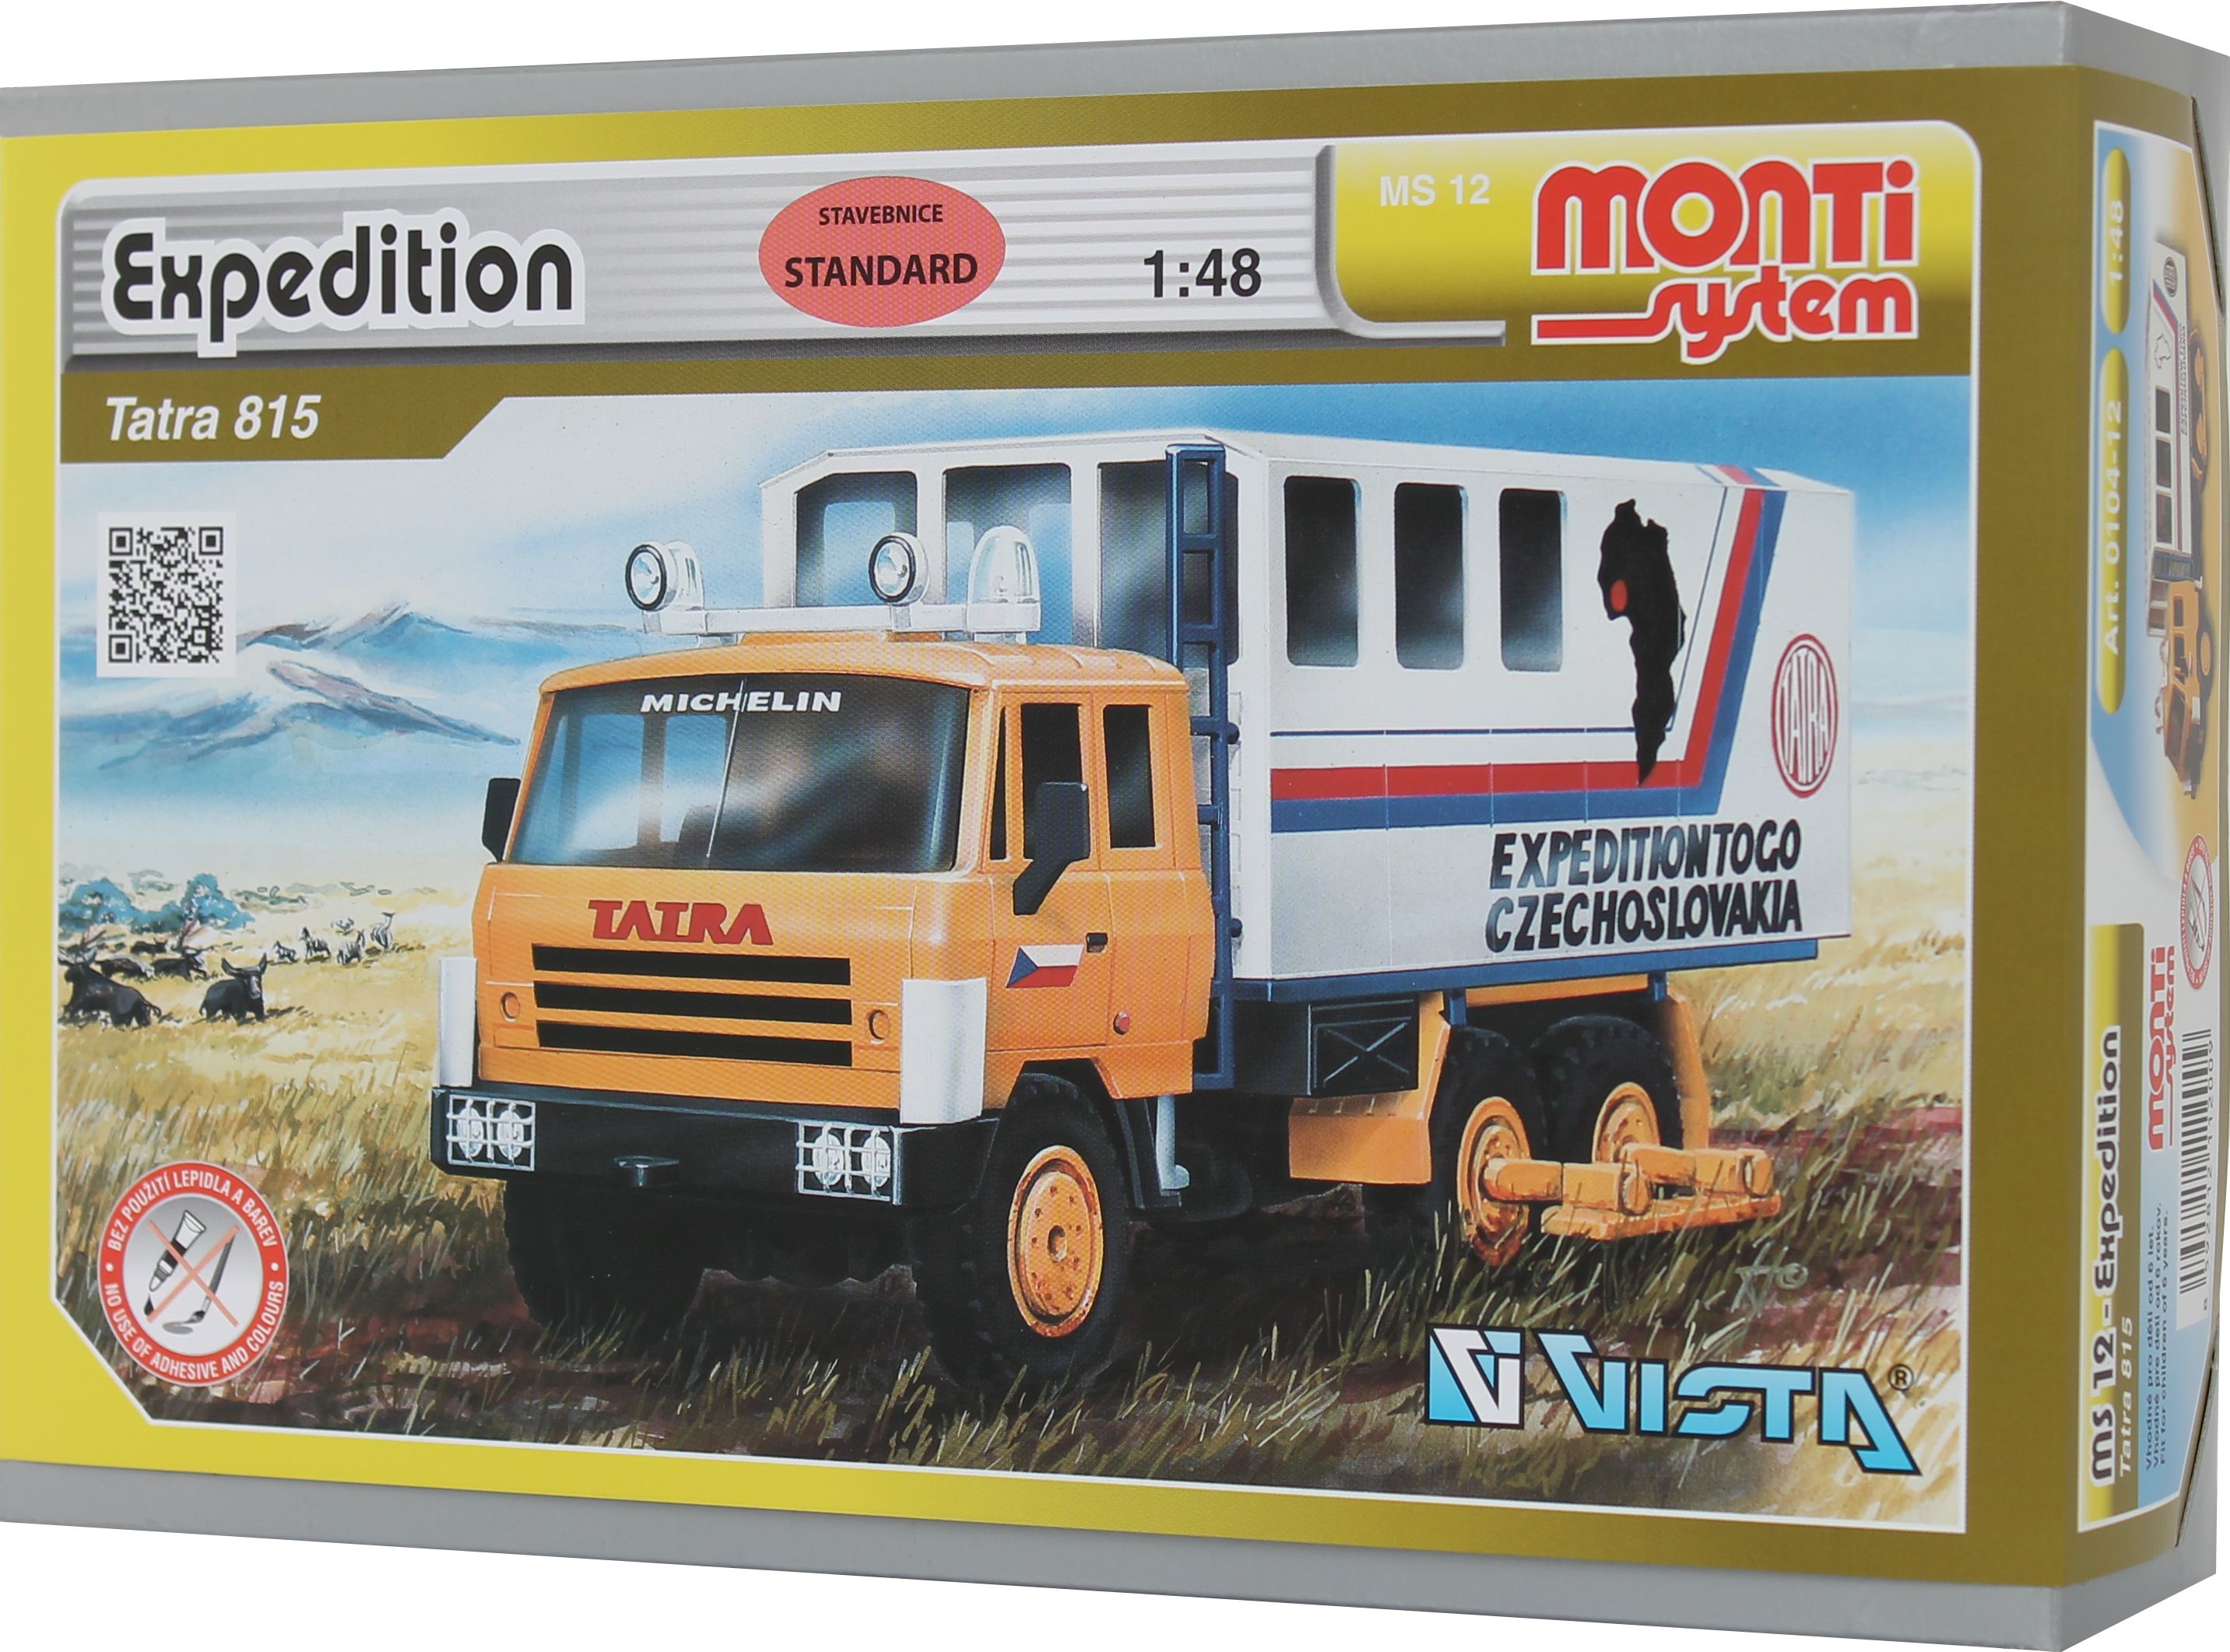 MS 12 - Expedition